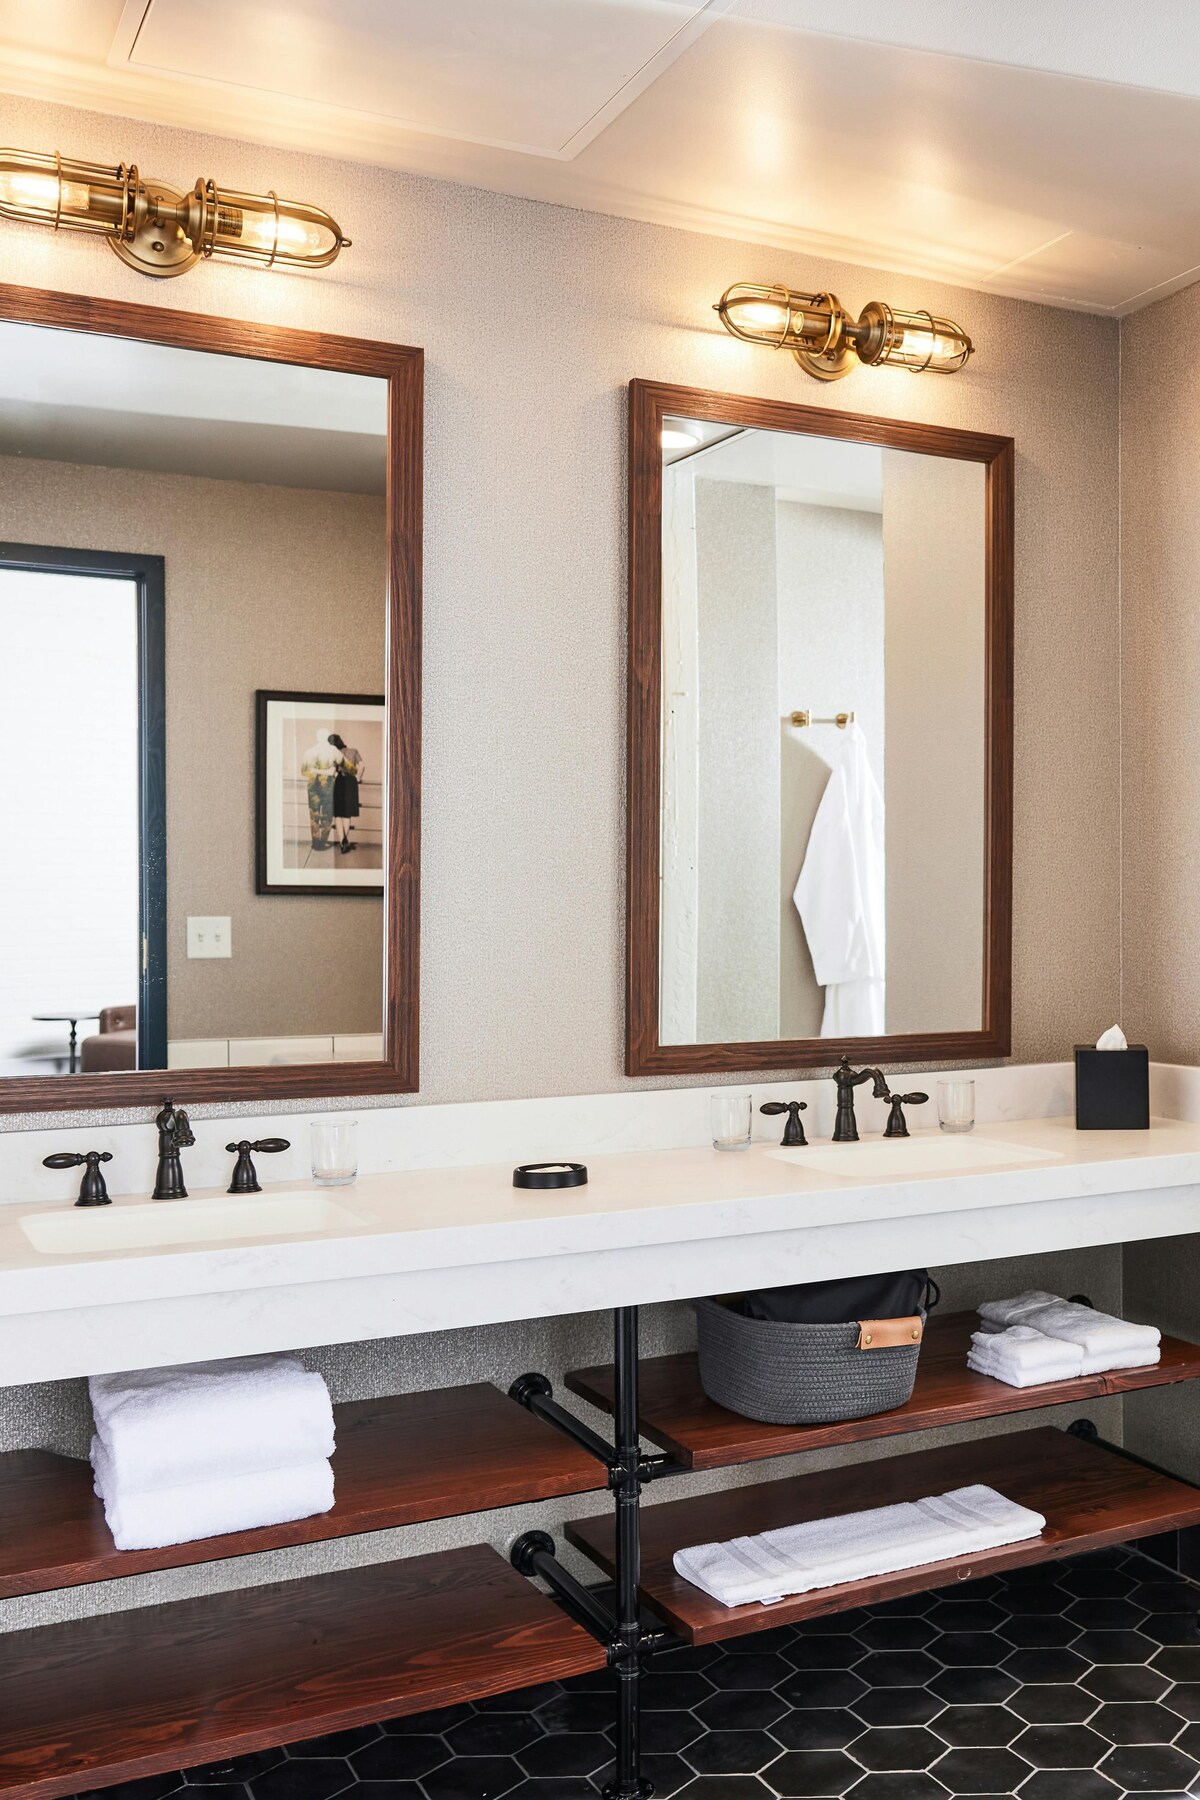 ADA-appointed suite with luxe bath amenities